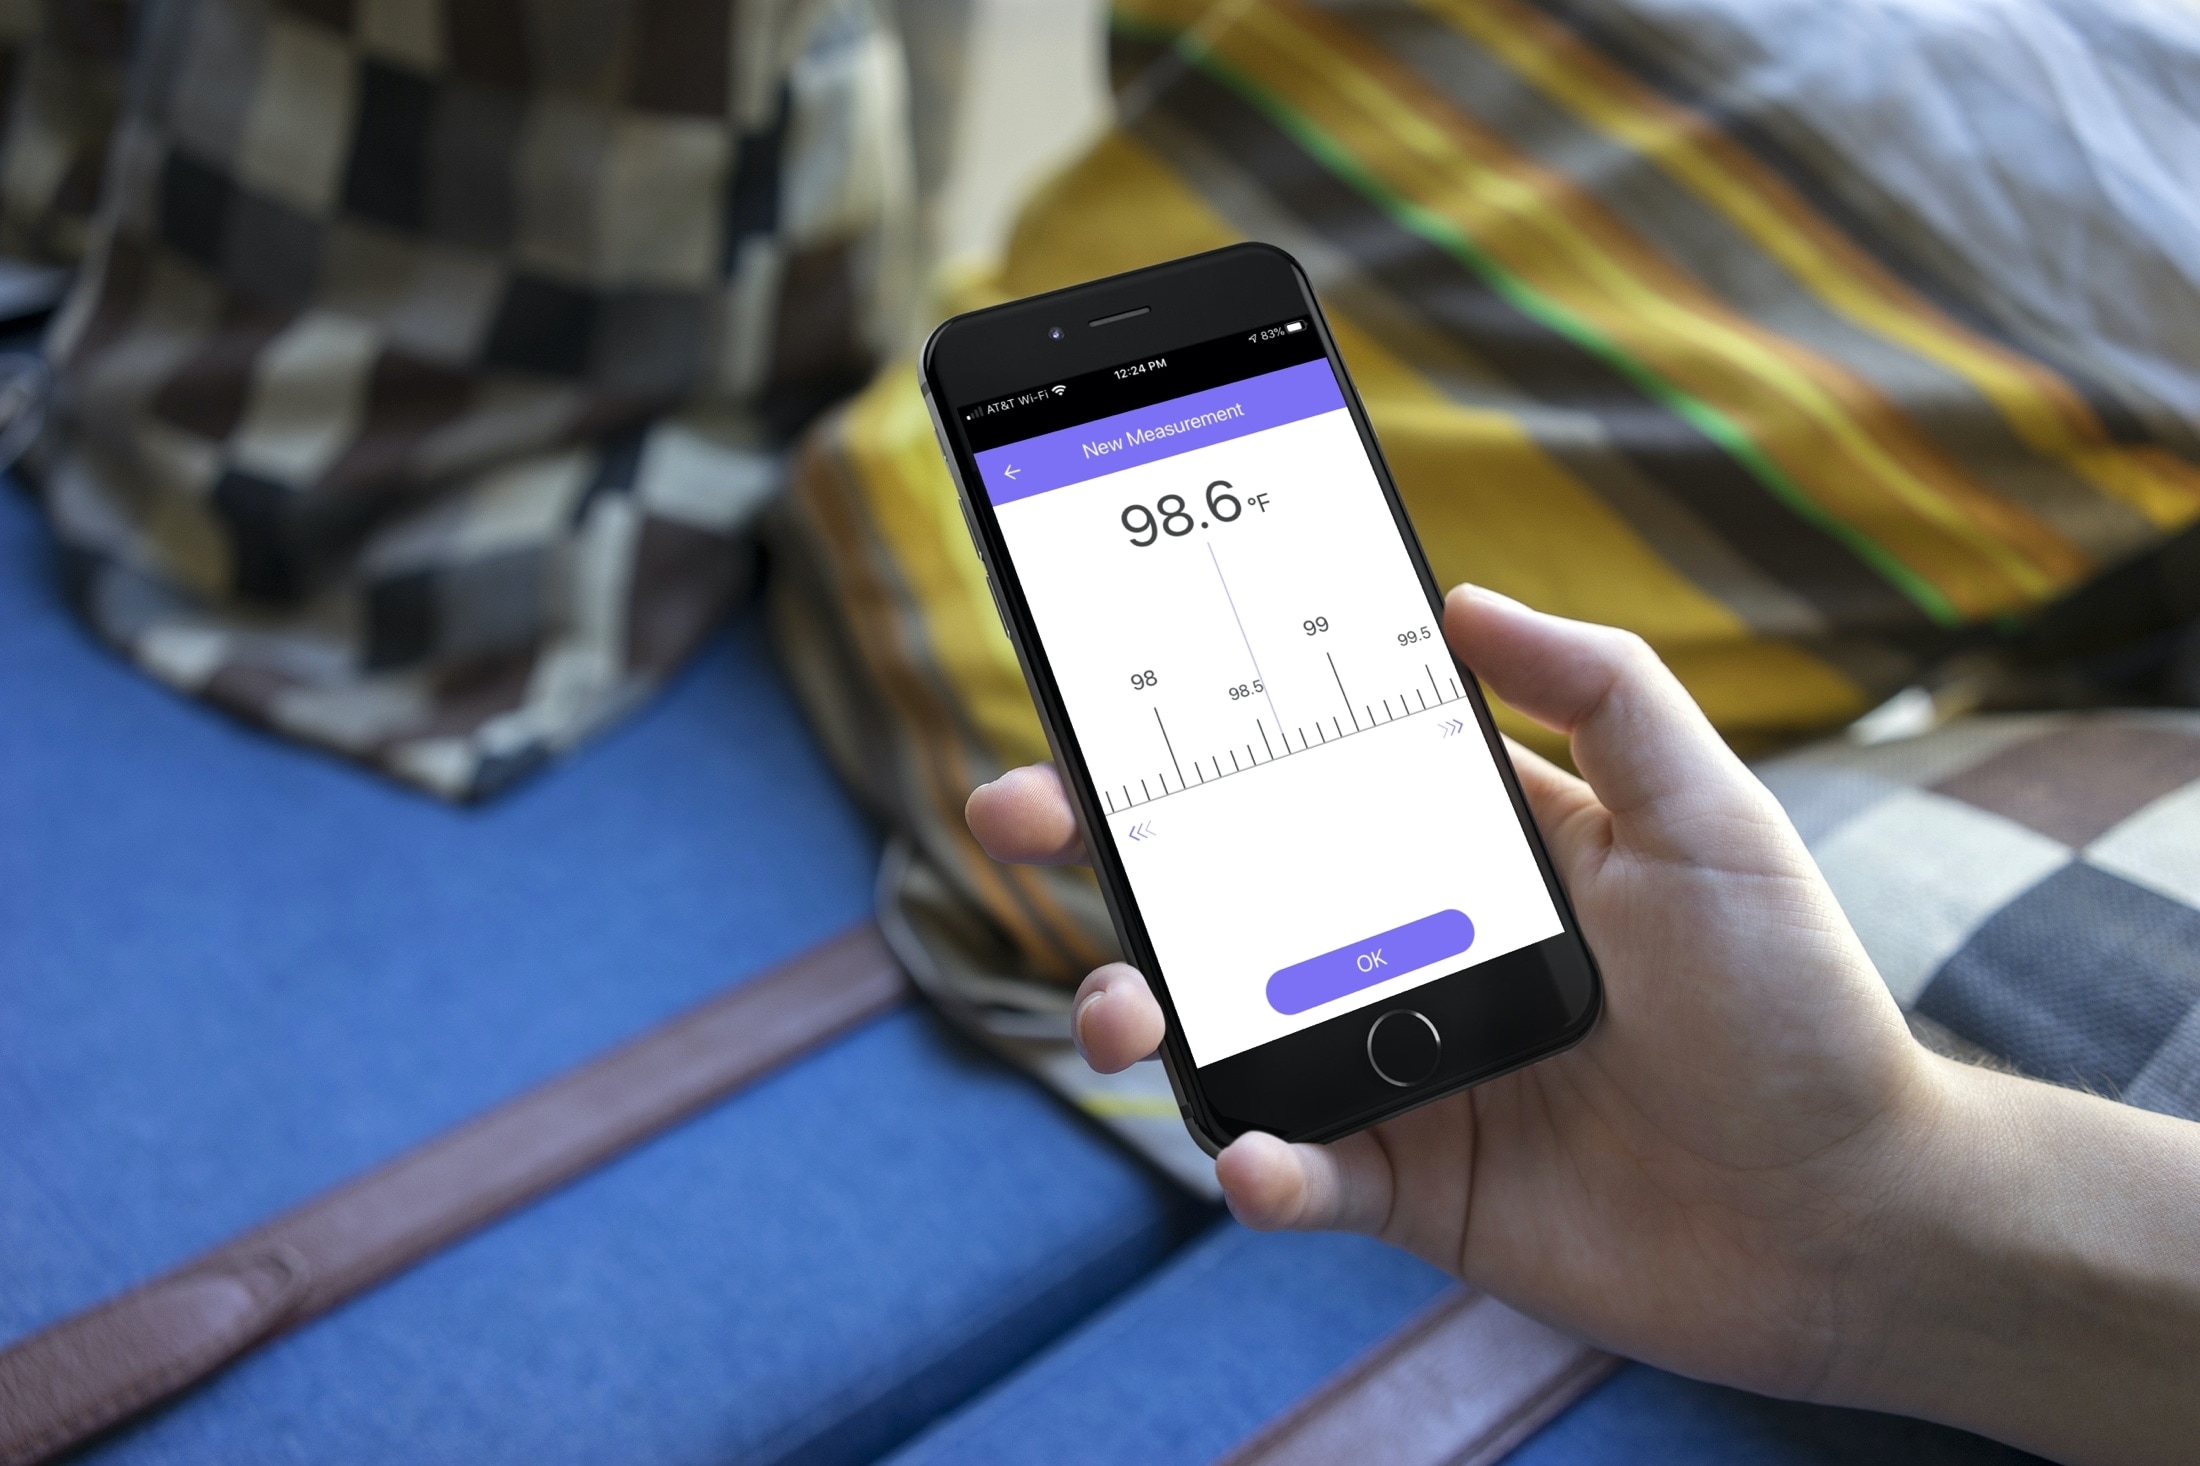 body temperature tracking apps for iPhone - MedM